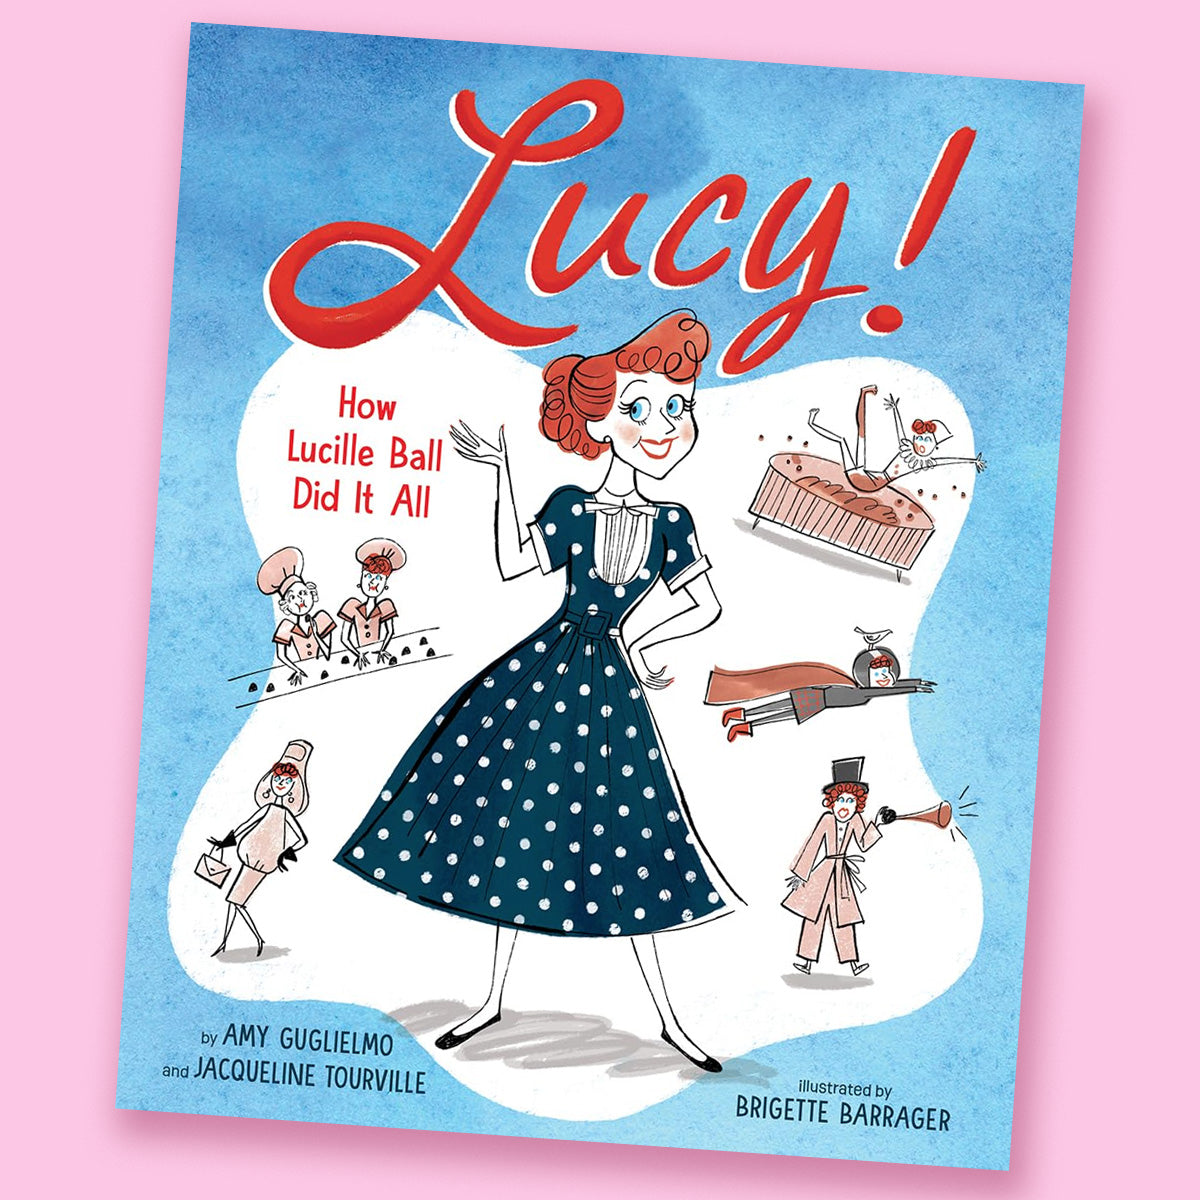 Lucy!: How Lucille Ball Did It All by Amy Guglielmo, Jacqueline Tourville, and Brigette Barrager